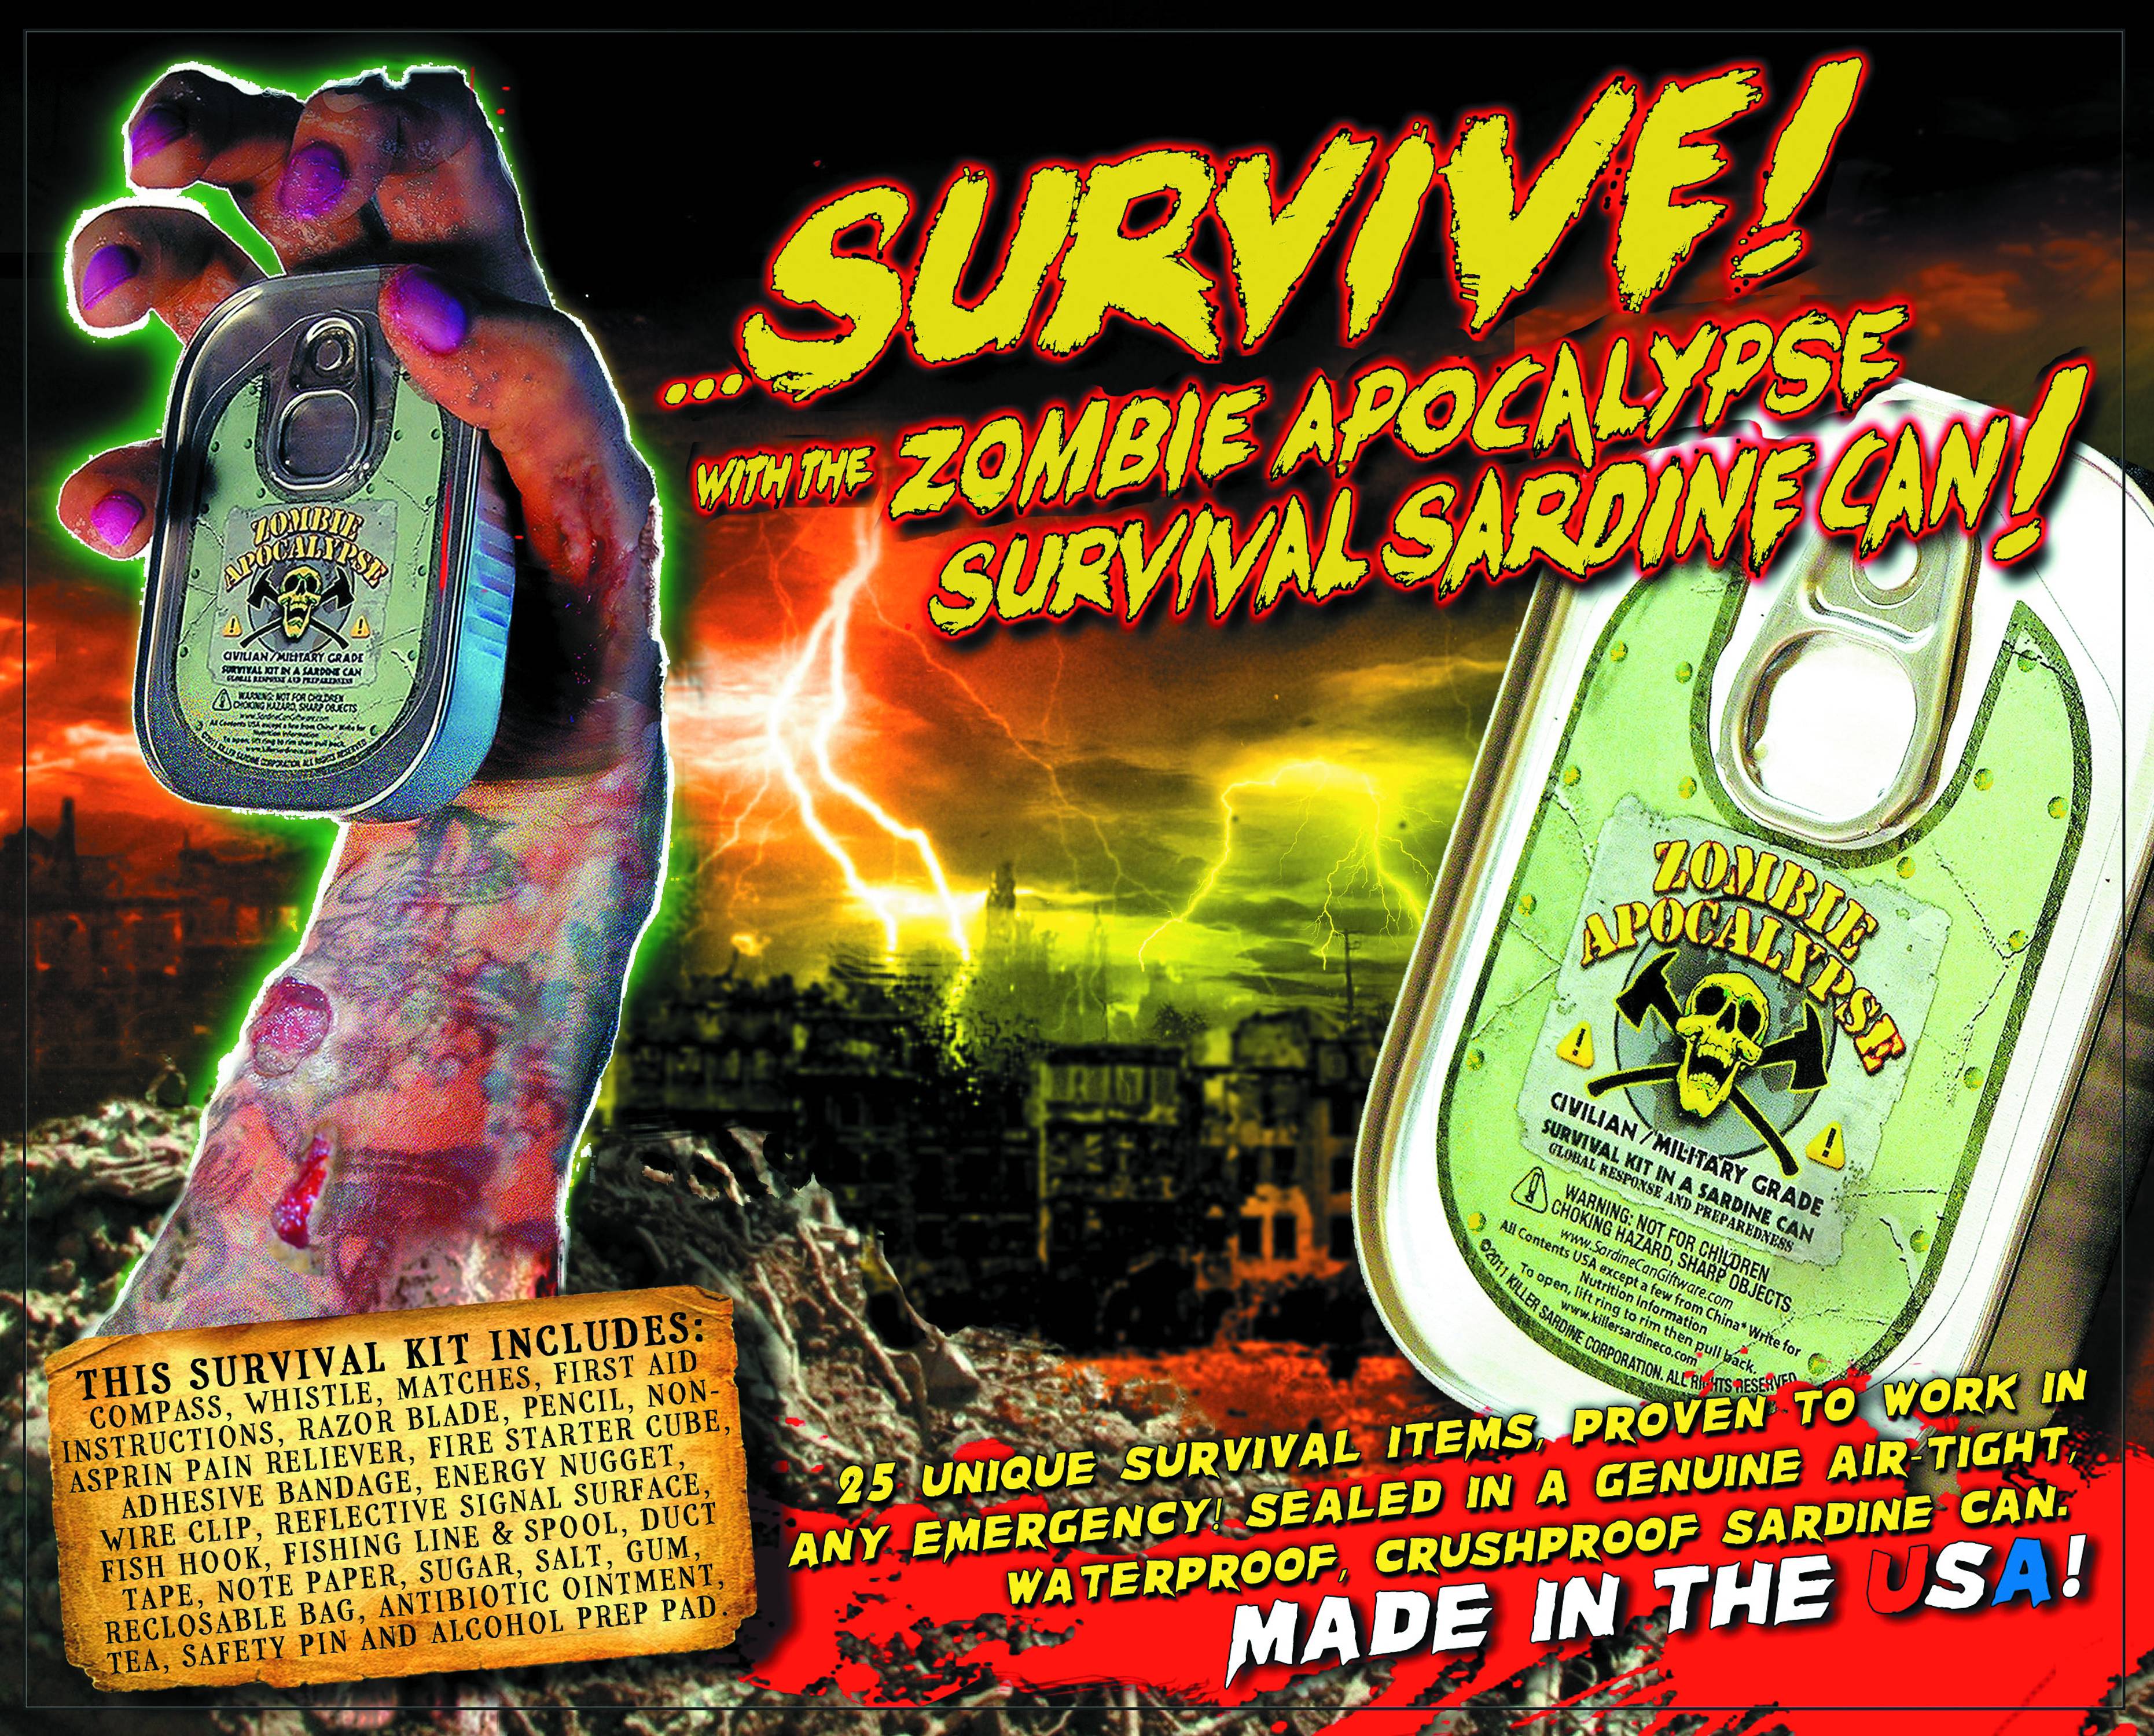 FEB121688 - ZOMBIE APOCALYPSE SURVIVAL KIT IN A SARDINE CAN - Previews World